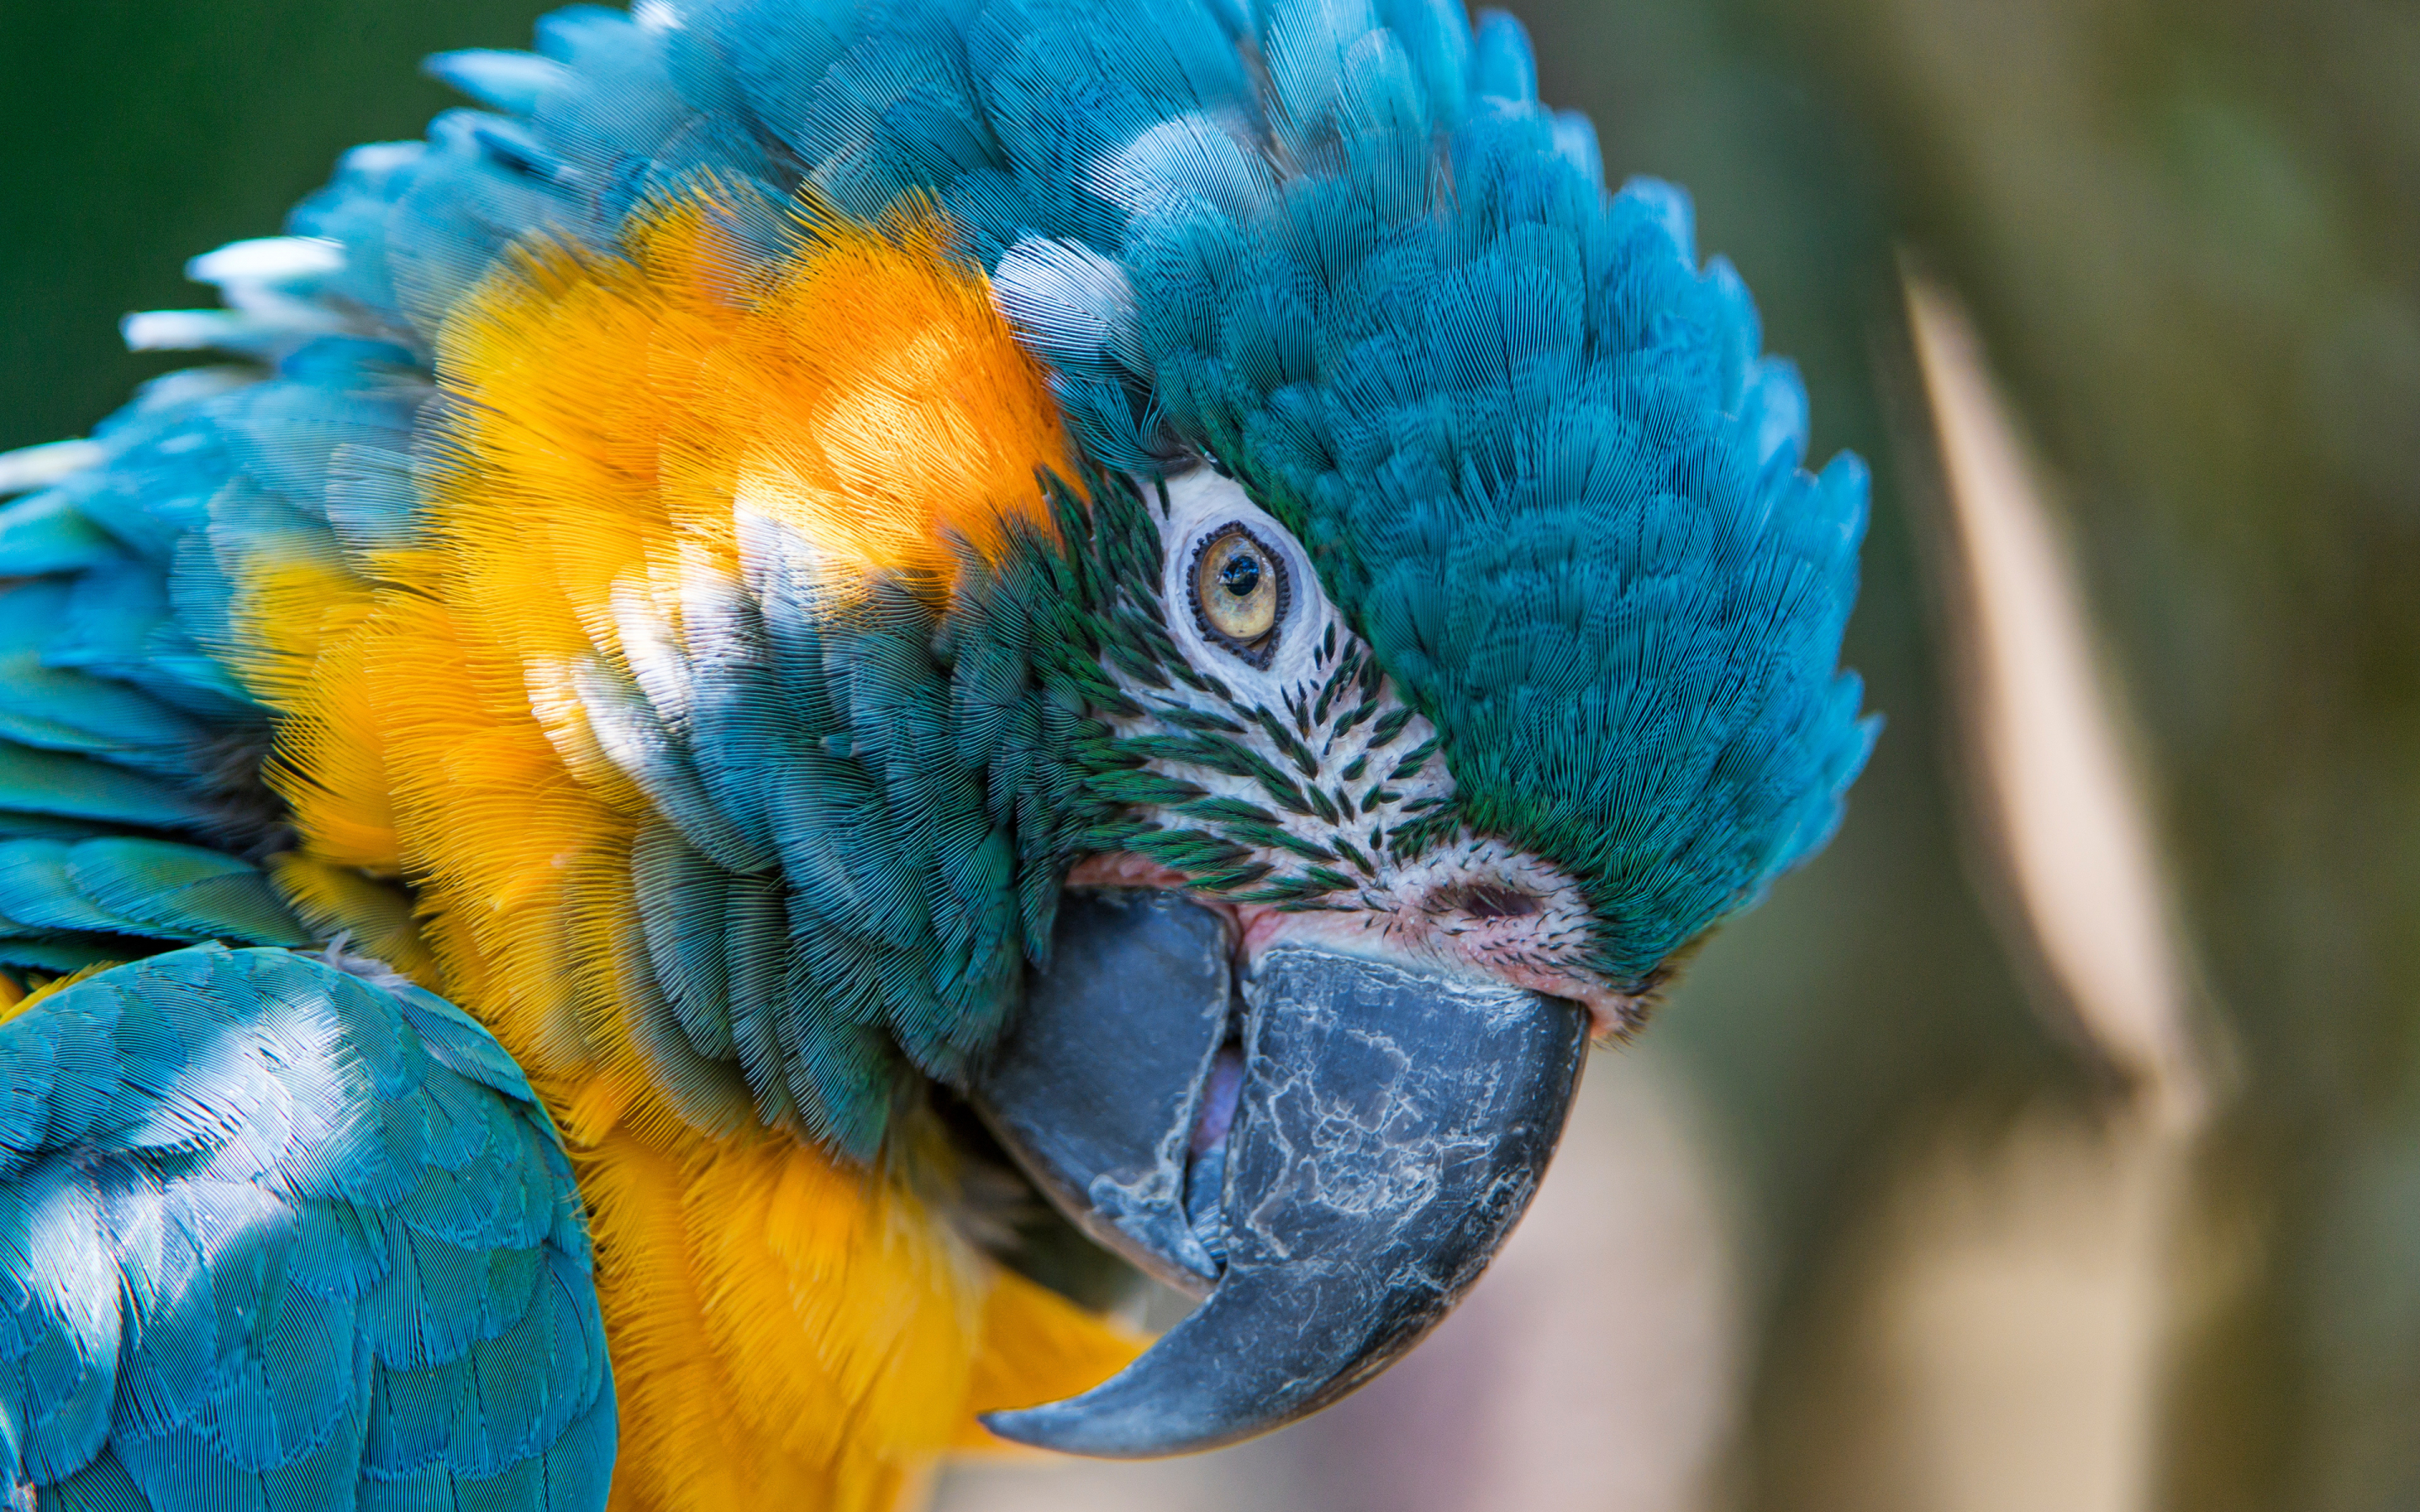 Macaw, parrot, colorful bird, muzzle, close up, 2880x1800 wallpaper